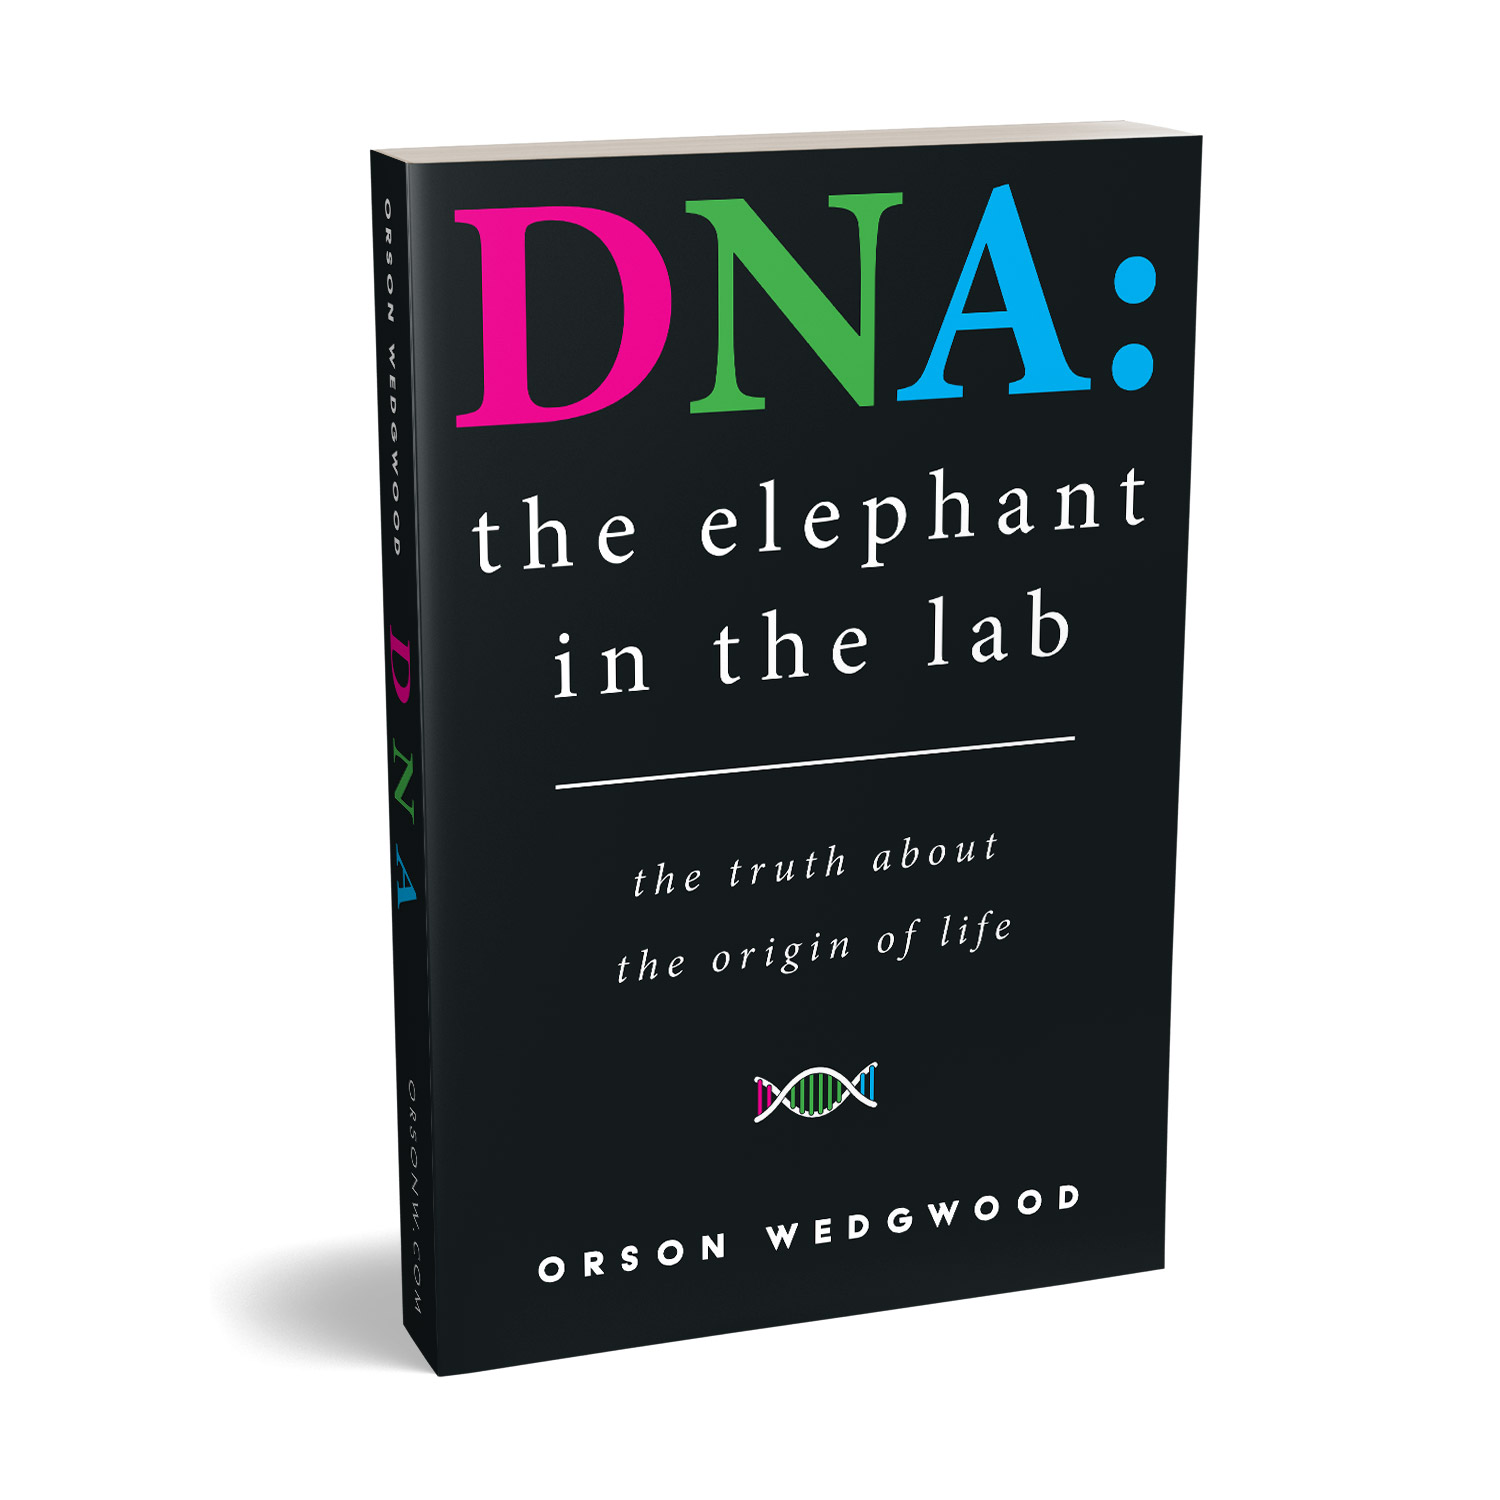 'DNA: The Elephant In the Lab' is a science and faith meditation on the origins of life. The author is Orson Wedgwood. The book cover & interior design is by Mark Thomas. To learn more about what Mark could do for your book, please visit coverness.com.